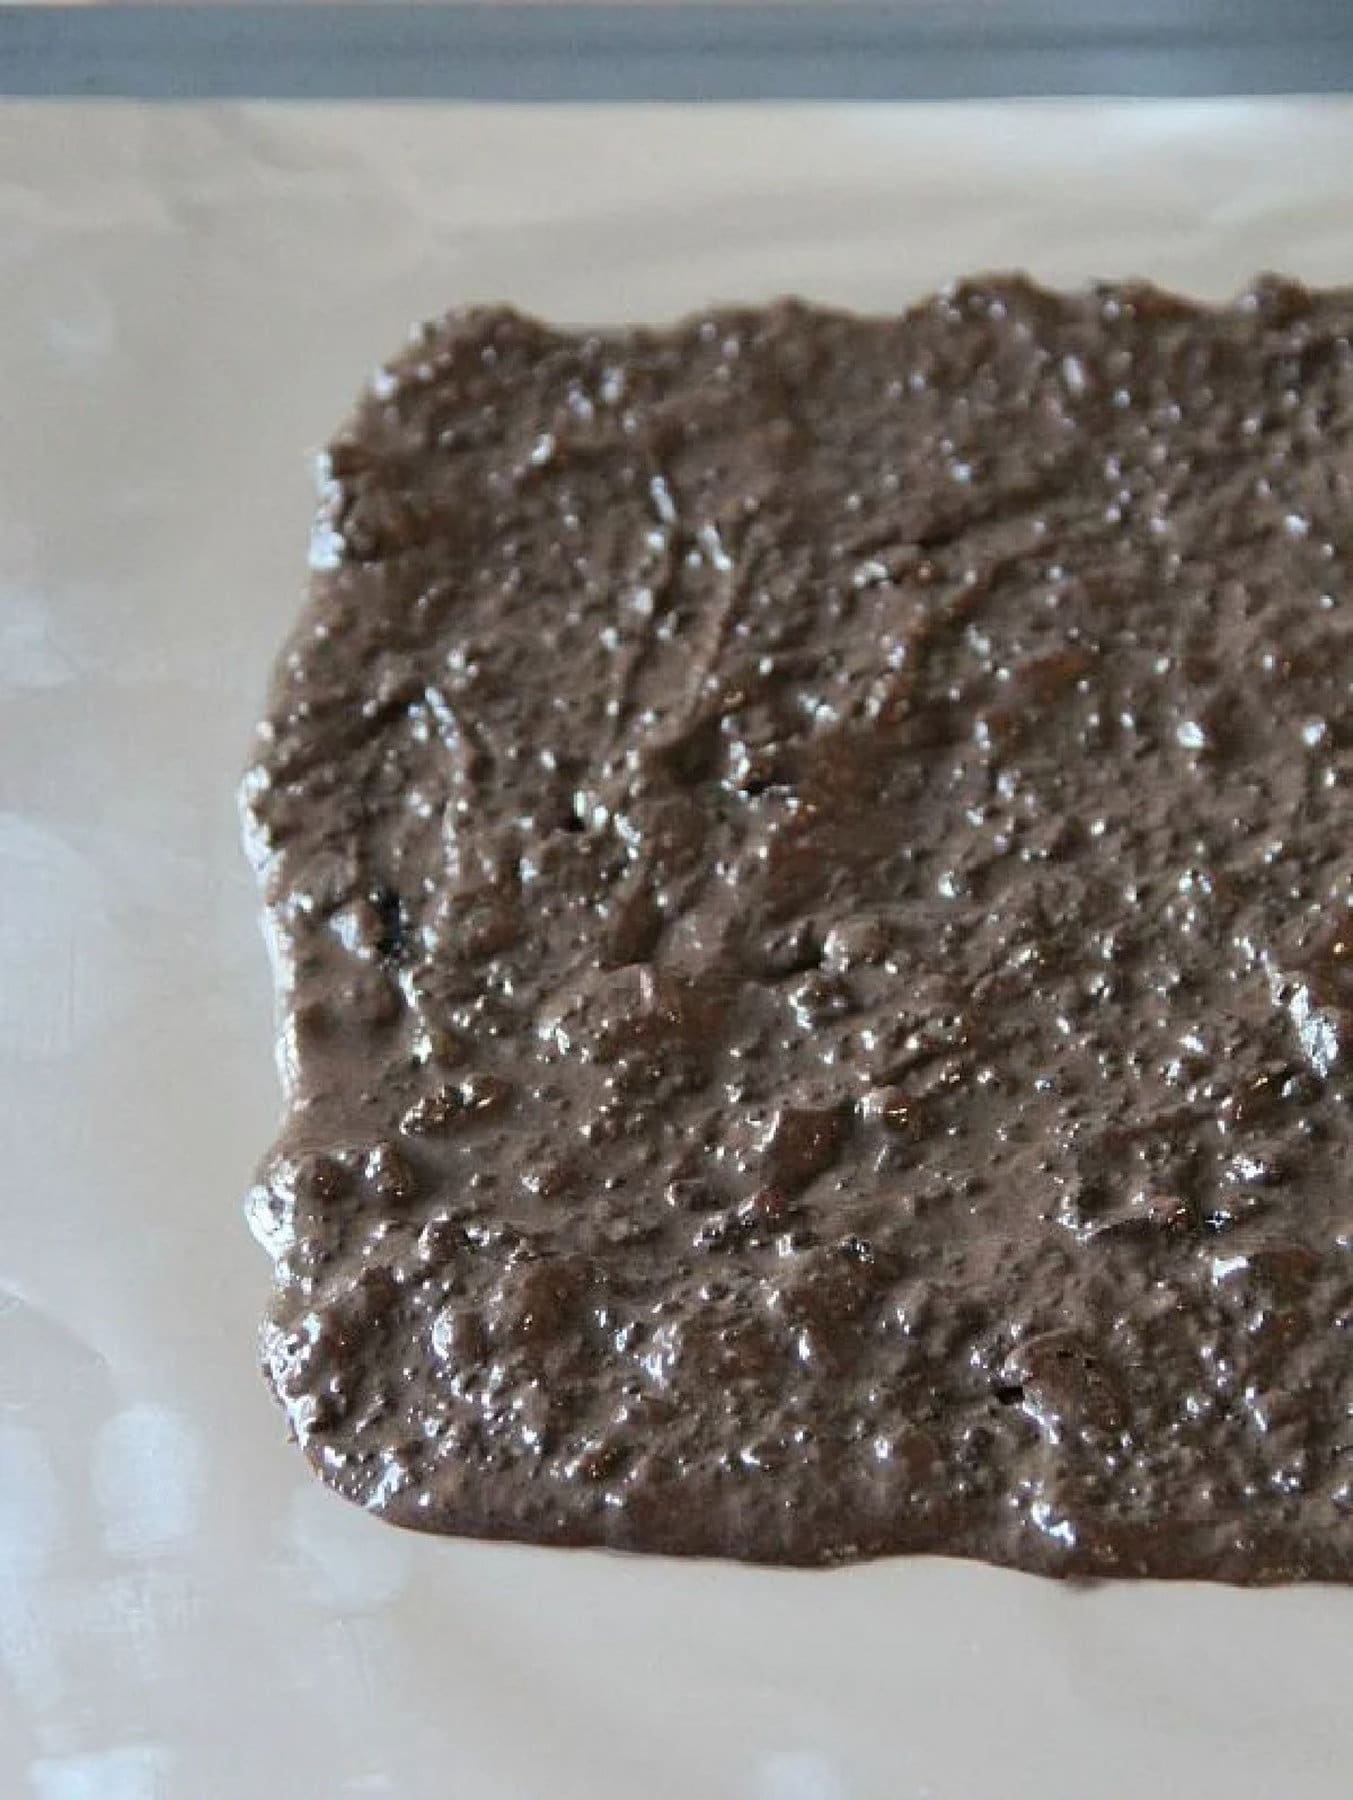 Chocolate oreo mixture spread on a pan and frozen